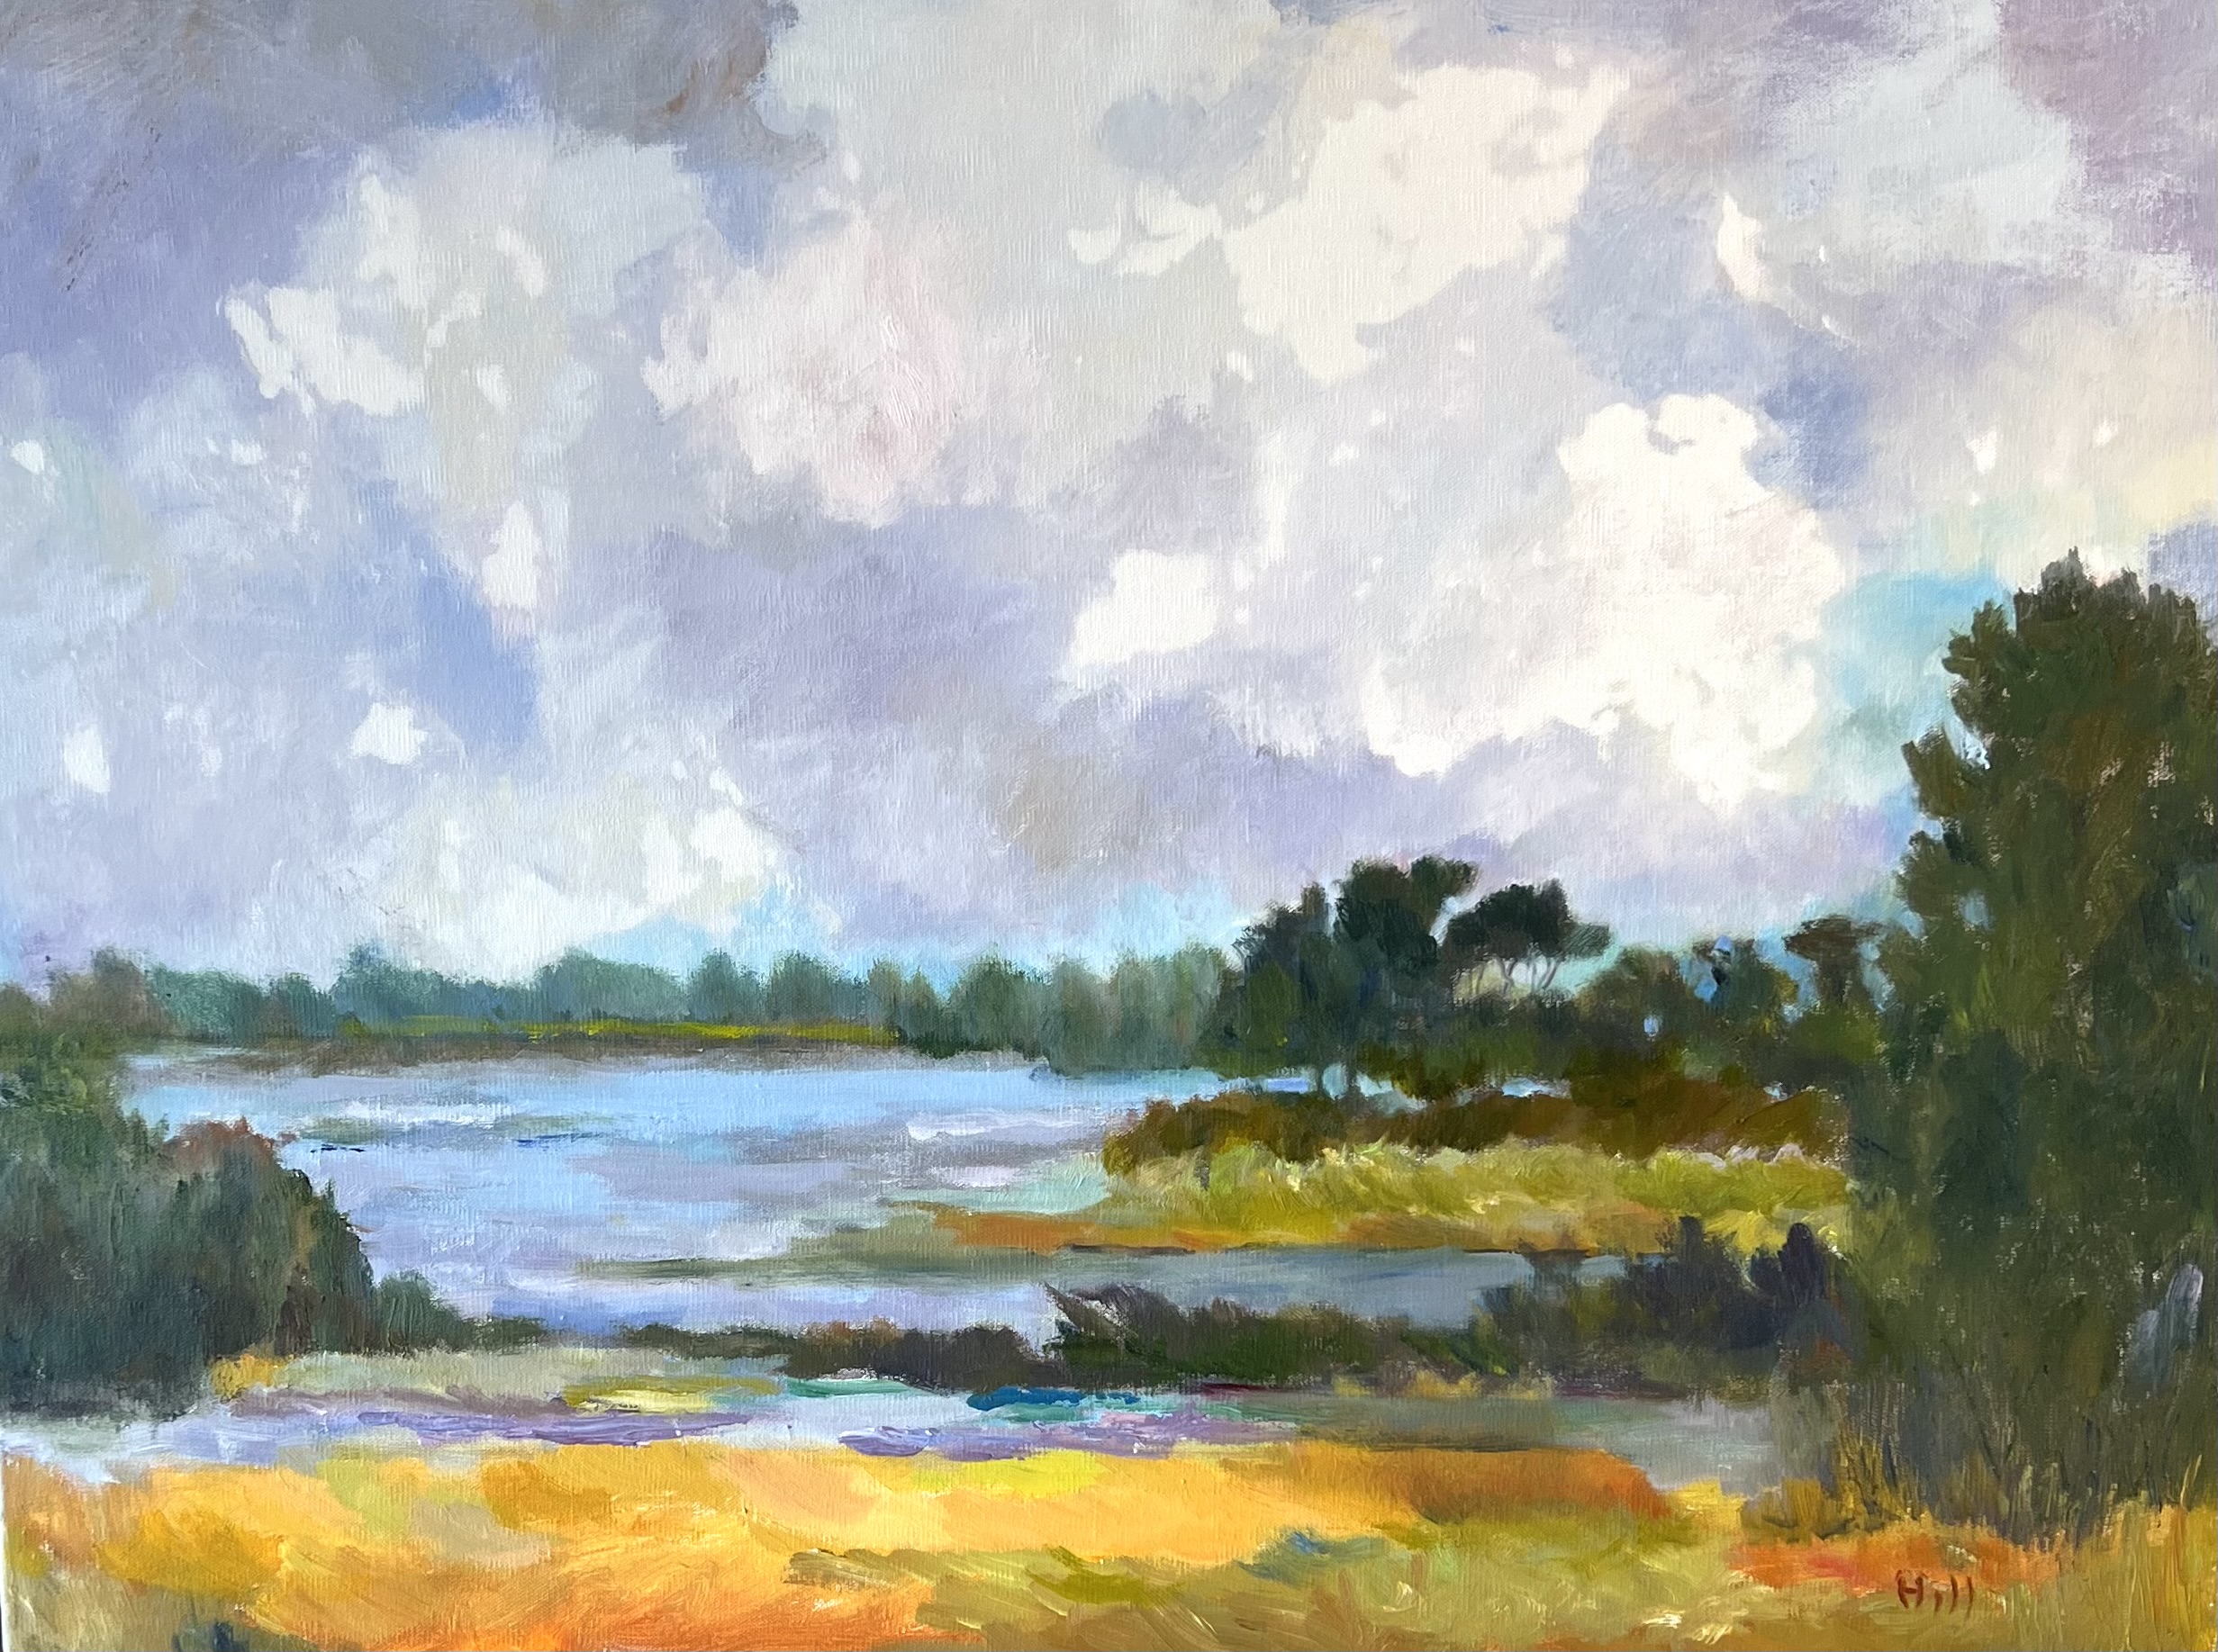 Margaret Hill - River View - Oil on Canvas - 18x24